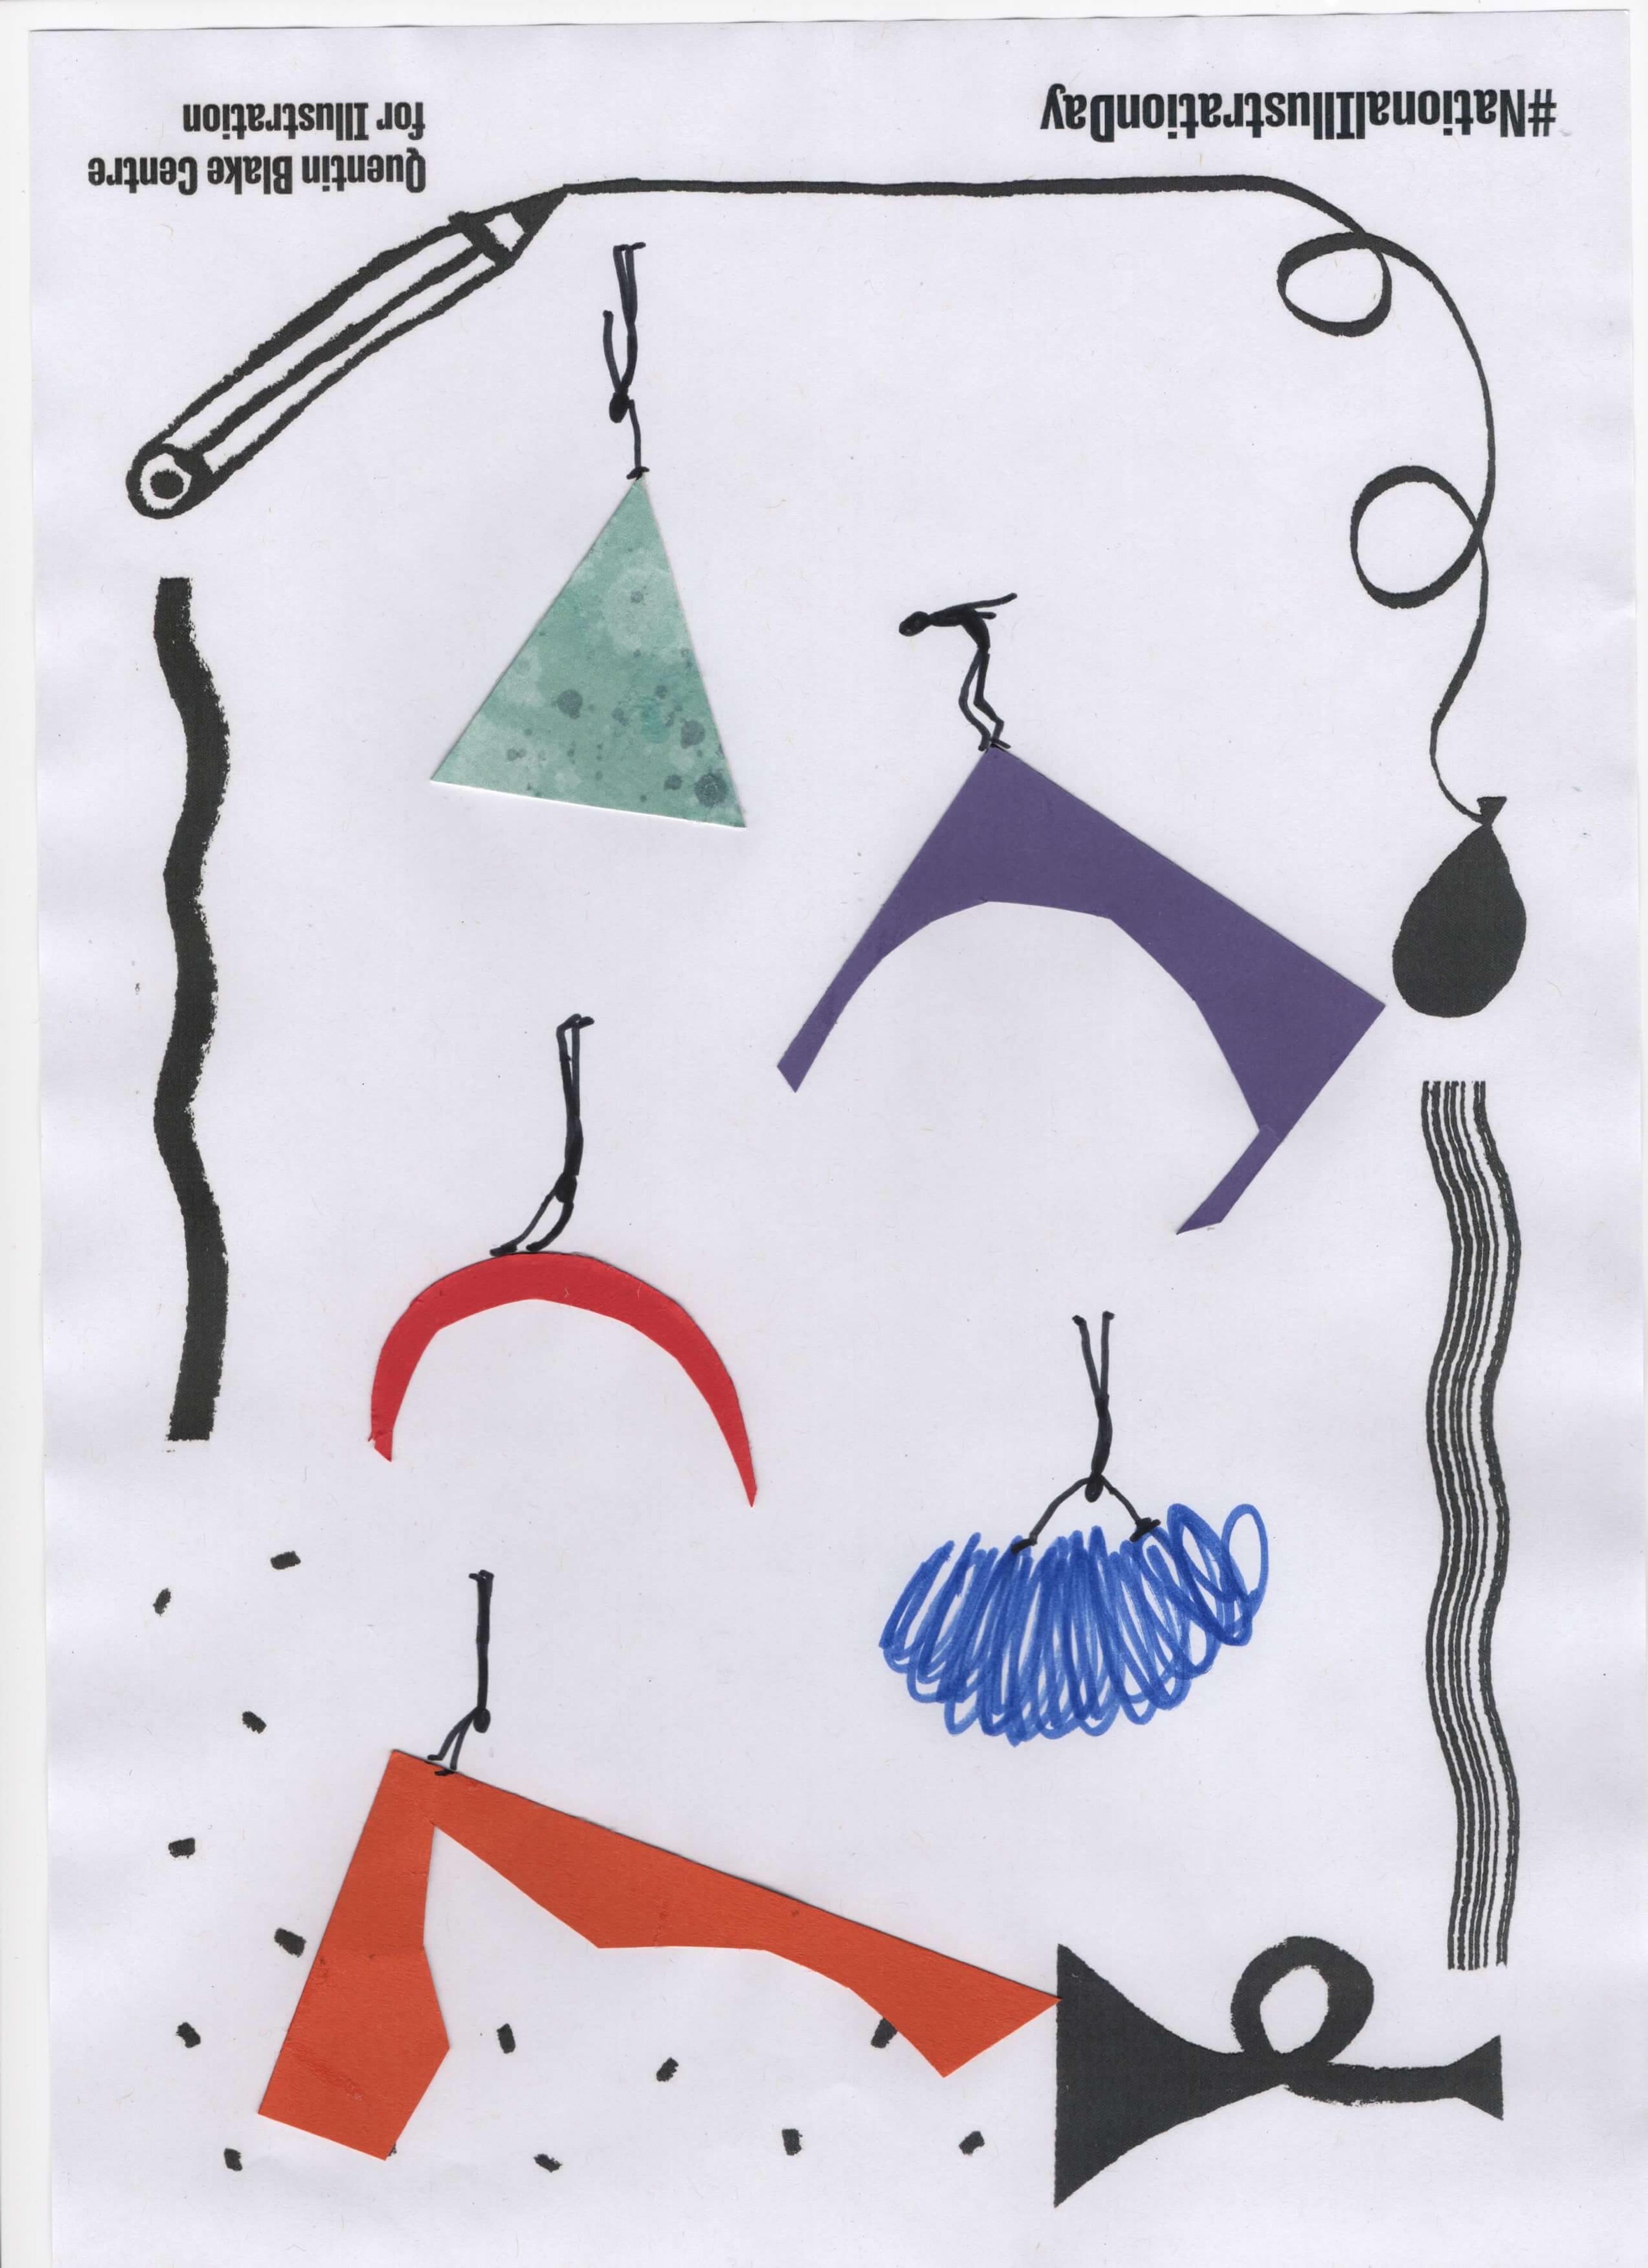 Whimsical stick figures appearing to fall down the page, holding on to abstract collage cut-out shapes. 